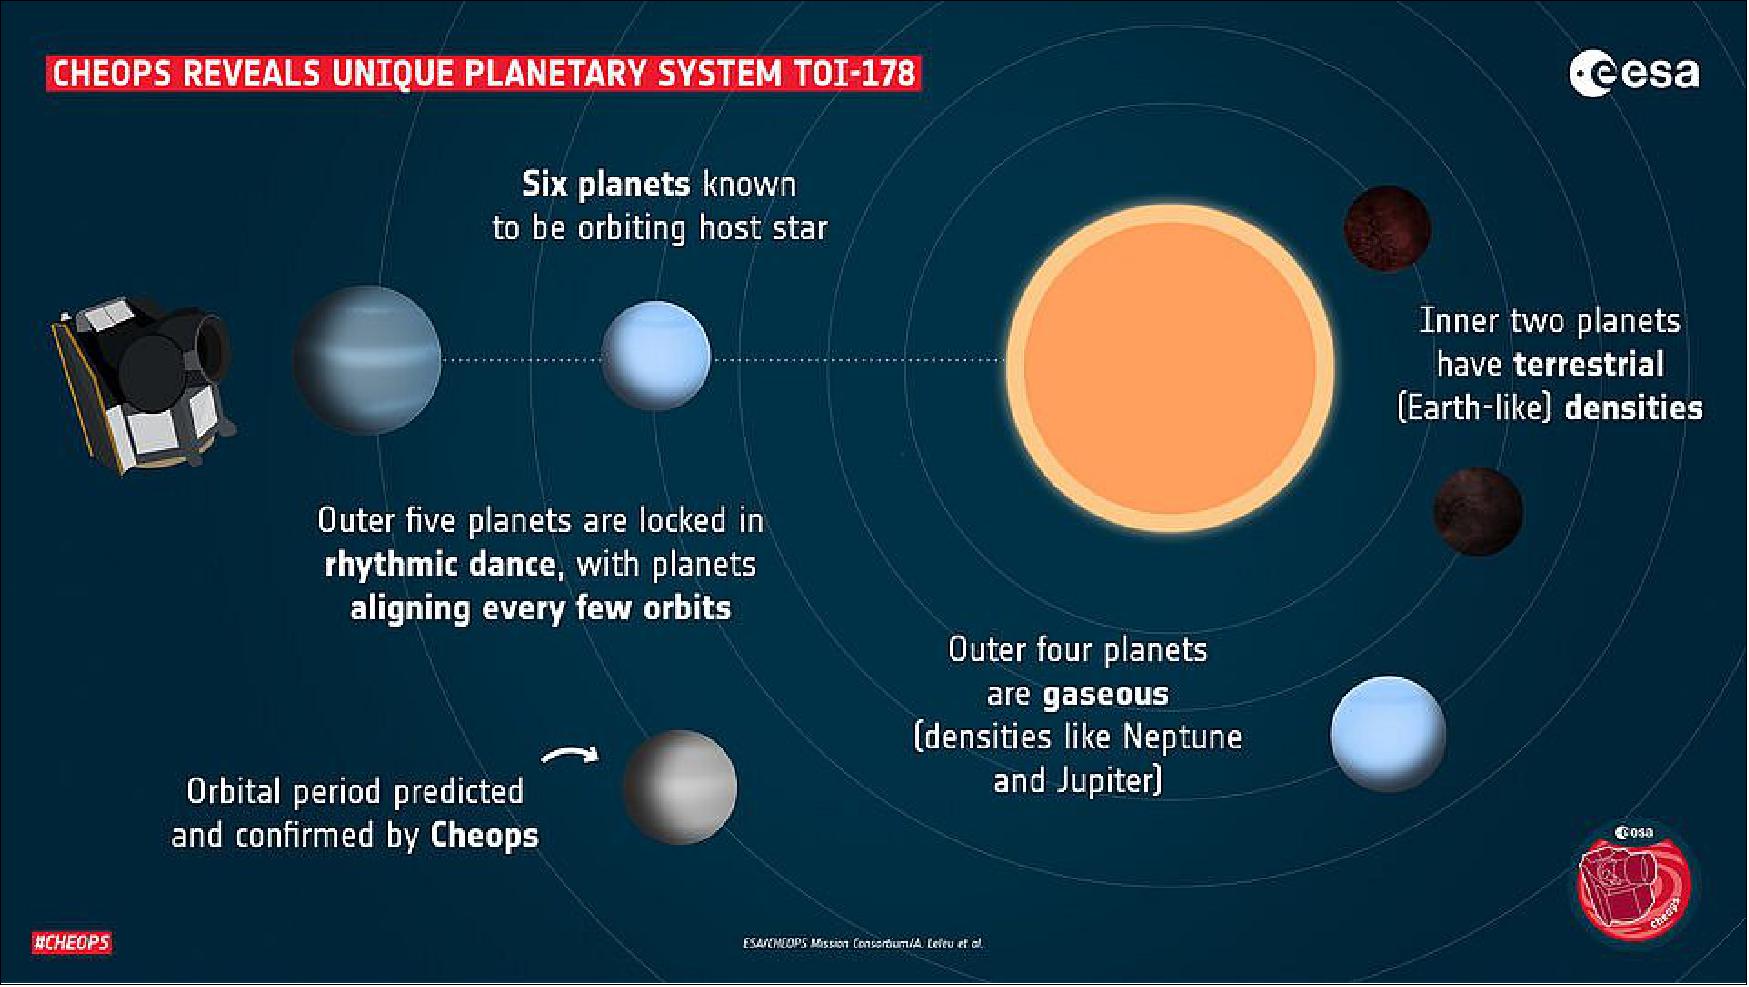 Figure 20: This graphic shows a representation of the TOI-178 planetary system, which was revealed by ESA’s exoplanet watcher Cheops. The system consists of six exoplanets, five of which are locked in a rare rhythmic dance as they orbit their central star. The two inner planets have terrestrial densities (like Earth) and the outer four planets are gaseous (with densities like Neptune and Jupiter). The five outer planets follow a rhythmic dance as they move in their orbits. This phenomenon is called orbital resonance, and it means that there are patterns that repeat themselves as the planets go around the star, with some planets aligning every few orbits. While the planets in the TOI-178 system orbit their star in a very orderly manner, their densities do not follow any particular pattern. One of the exoplanets, a dense, terrestrial planet like Earth is right next to a similar-sized but very fluffy planet – like a mini-Jupiter, and next to that is one very similar to Neptune. Astronomers did not expect to find this lay-out in a planetary system, and this discovery challenges current theories of planet formation. In this graphic, the relative sizes of the planets are to scale, but not the distances and the size of the star (image credit: ESA/Cheops Mission Consortium/A. Leleu et al.)